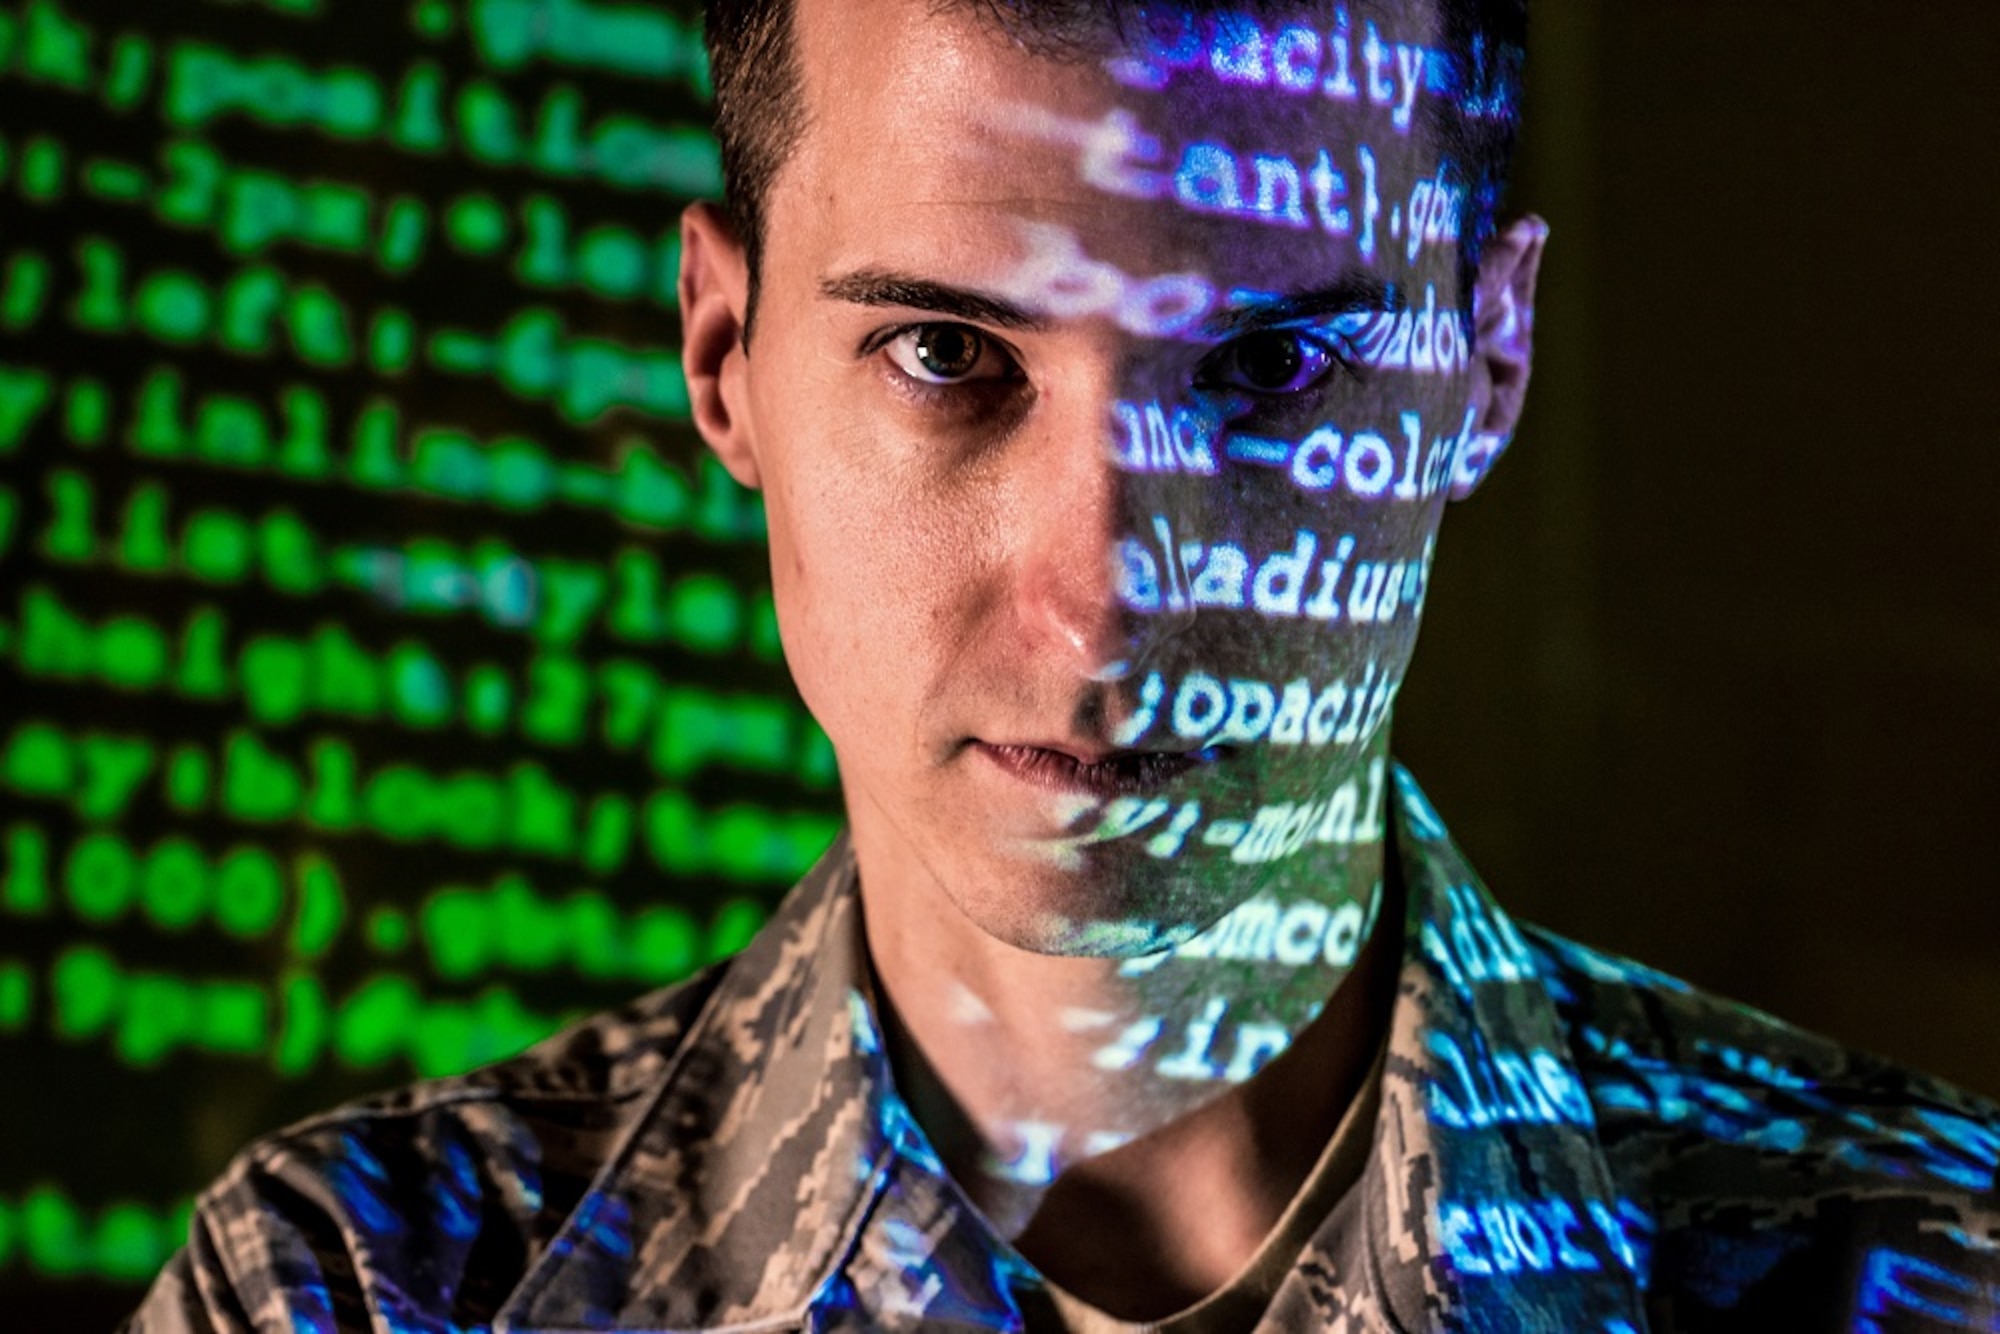 Tech Sgt. Kyle Hanslovan is a cyber-warfare specialist serving with the 175th Cyberspace Operations Group of the Maryland Air National Guard at Warfield Air National Guard Base, Middle River, Md. in this October 2017 photo. Hanslovan served on active duty with the Air Force for six years and then worked, in civilian life, as a cyber security contractor for the Department of Defense and now as the CEO of a cyber security start up firm. His continuing desire to serve his country led him to the Air National Guard, where he believes his civilian experience in defensive cyber-security greatly benefits his mission readiness for offensive cyber operations with the U.S. Air Force. (U.S. Air Force photo/J.M. Eddins Jr.)